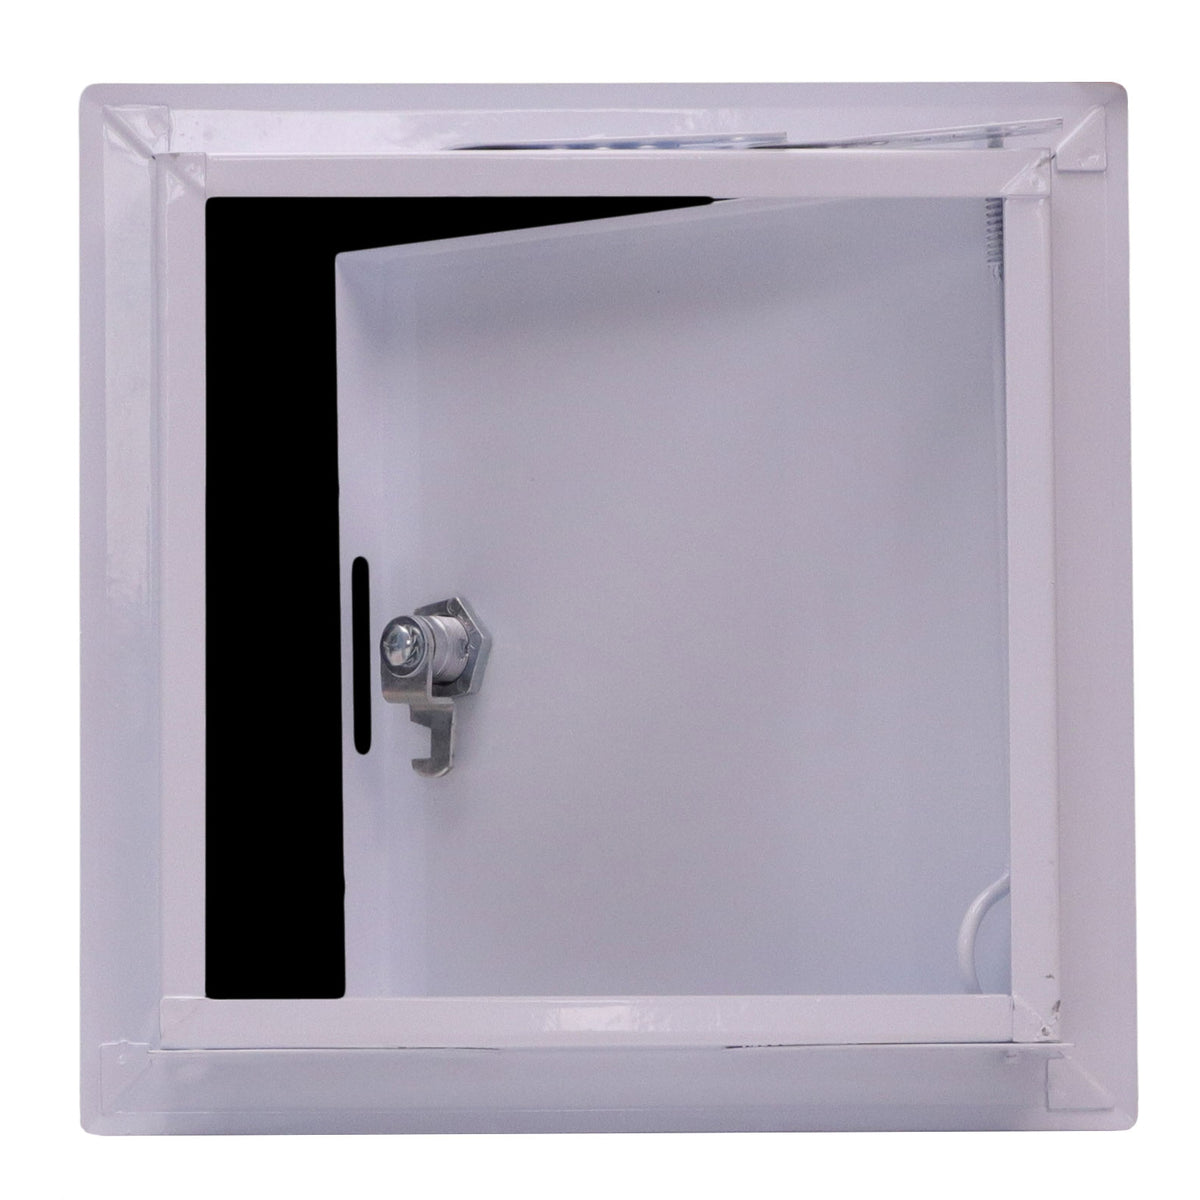 6&quot; X 6&quot; Steel Access Panel Removable Door For Wall / Ceiling Application (Lock and Key) With Frame - [Outer Dimensions: 7&quot; Width X 7&quot; Height]